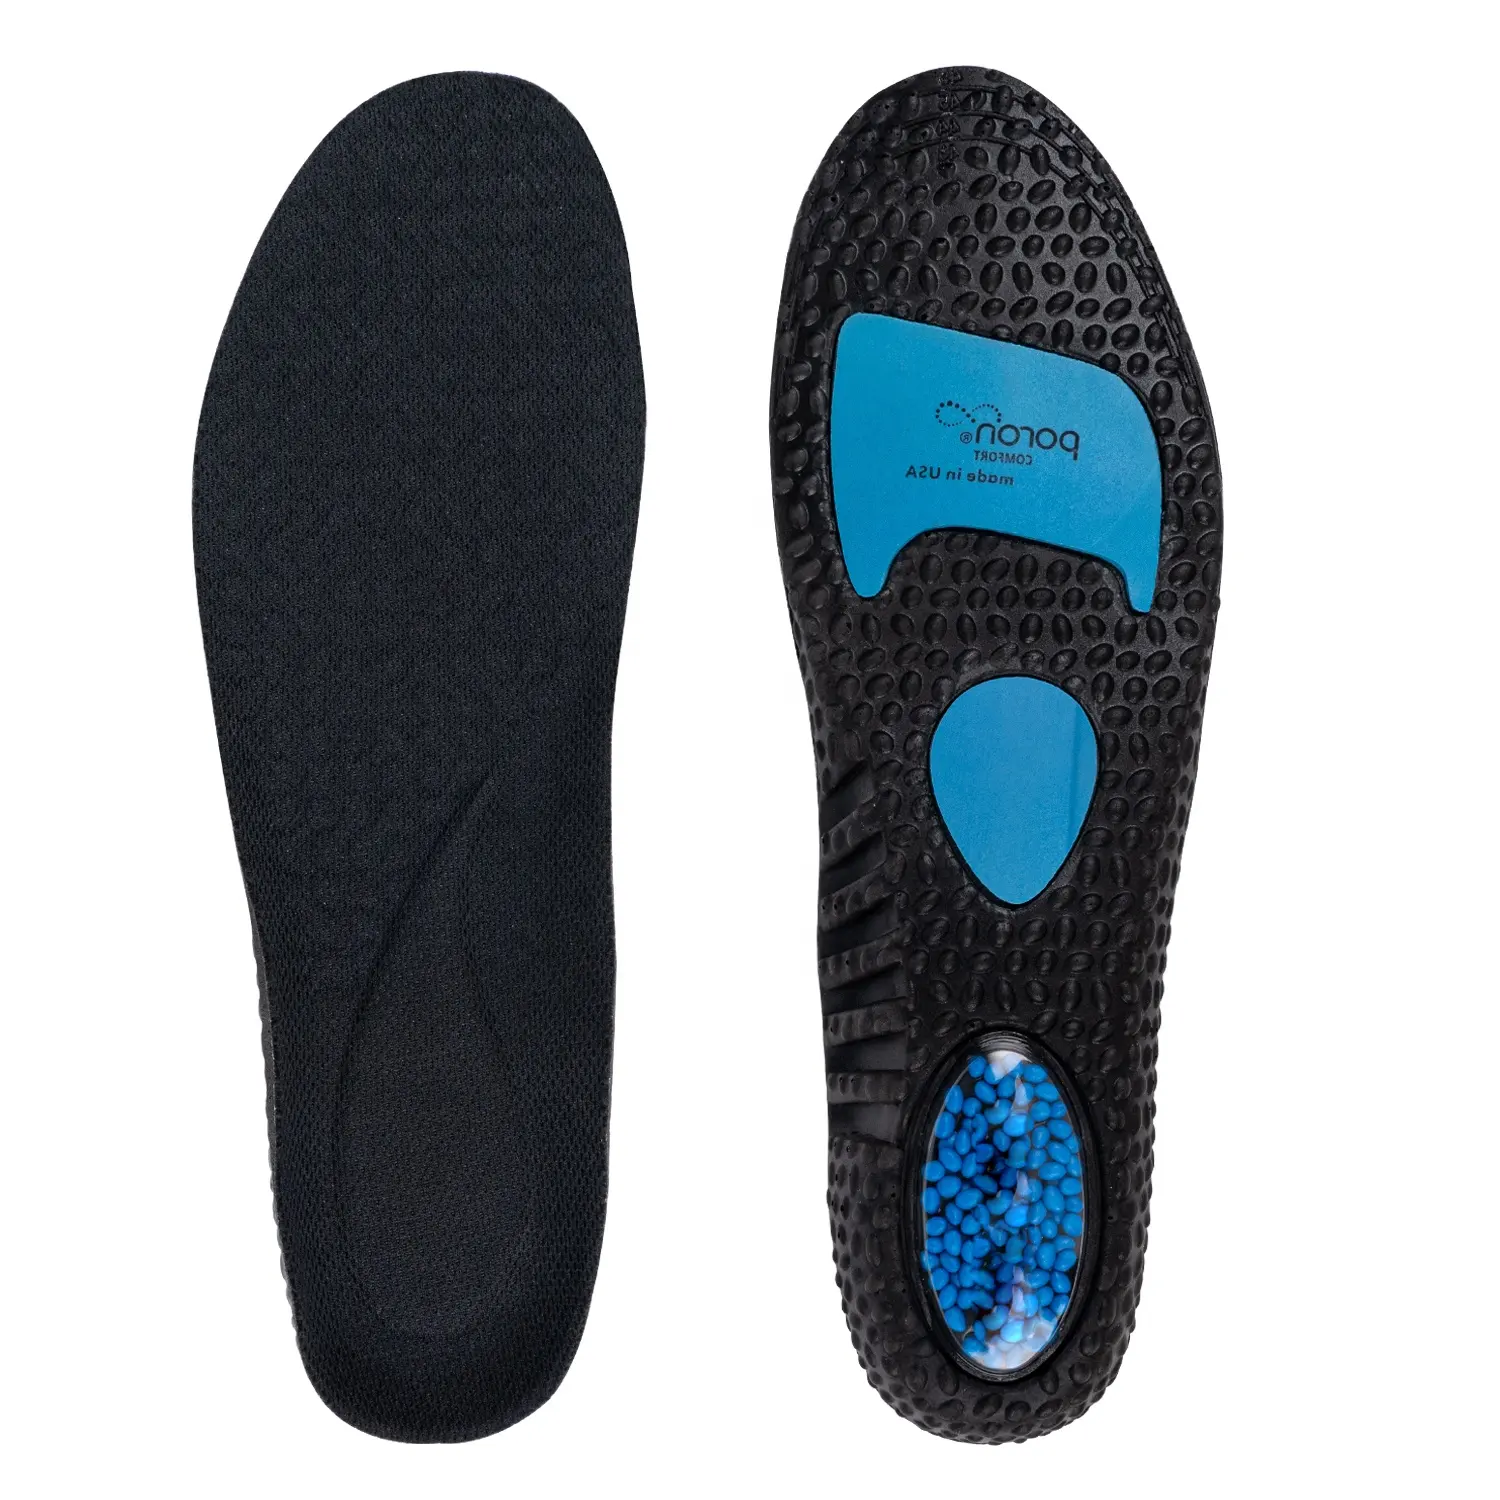 New High Elasticity Zoom Air Sports Insole Shock Absorption Arch Support Pain Relief PU TPU Poron Air Cushion Insole